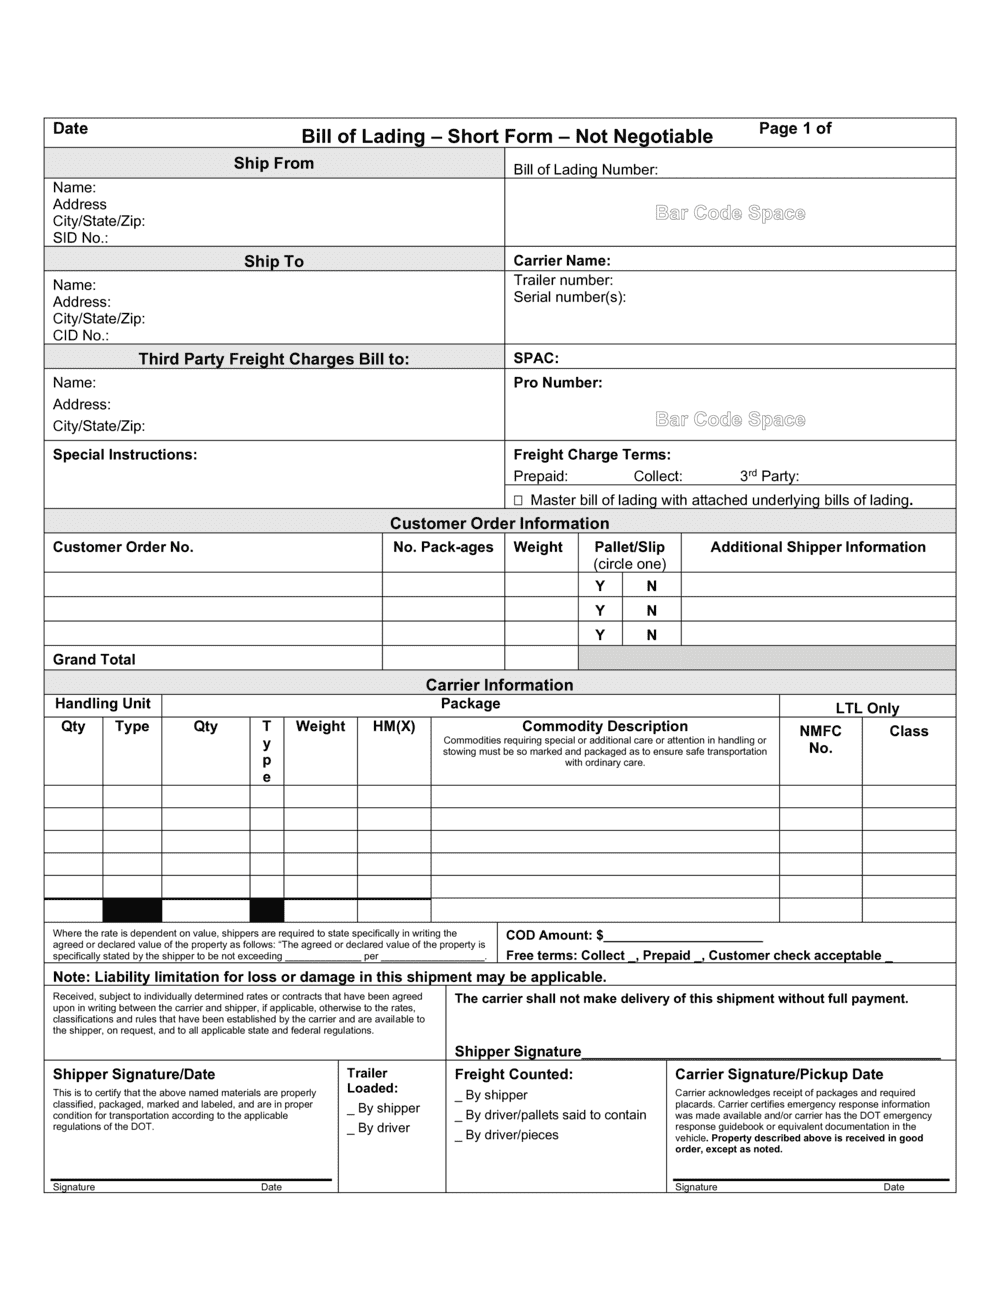 Bill of Lading Template by Business in a Box™